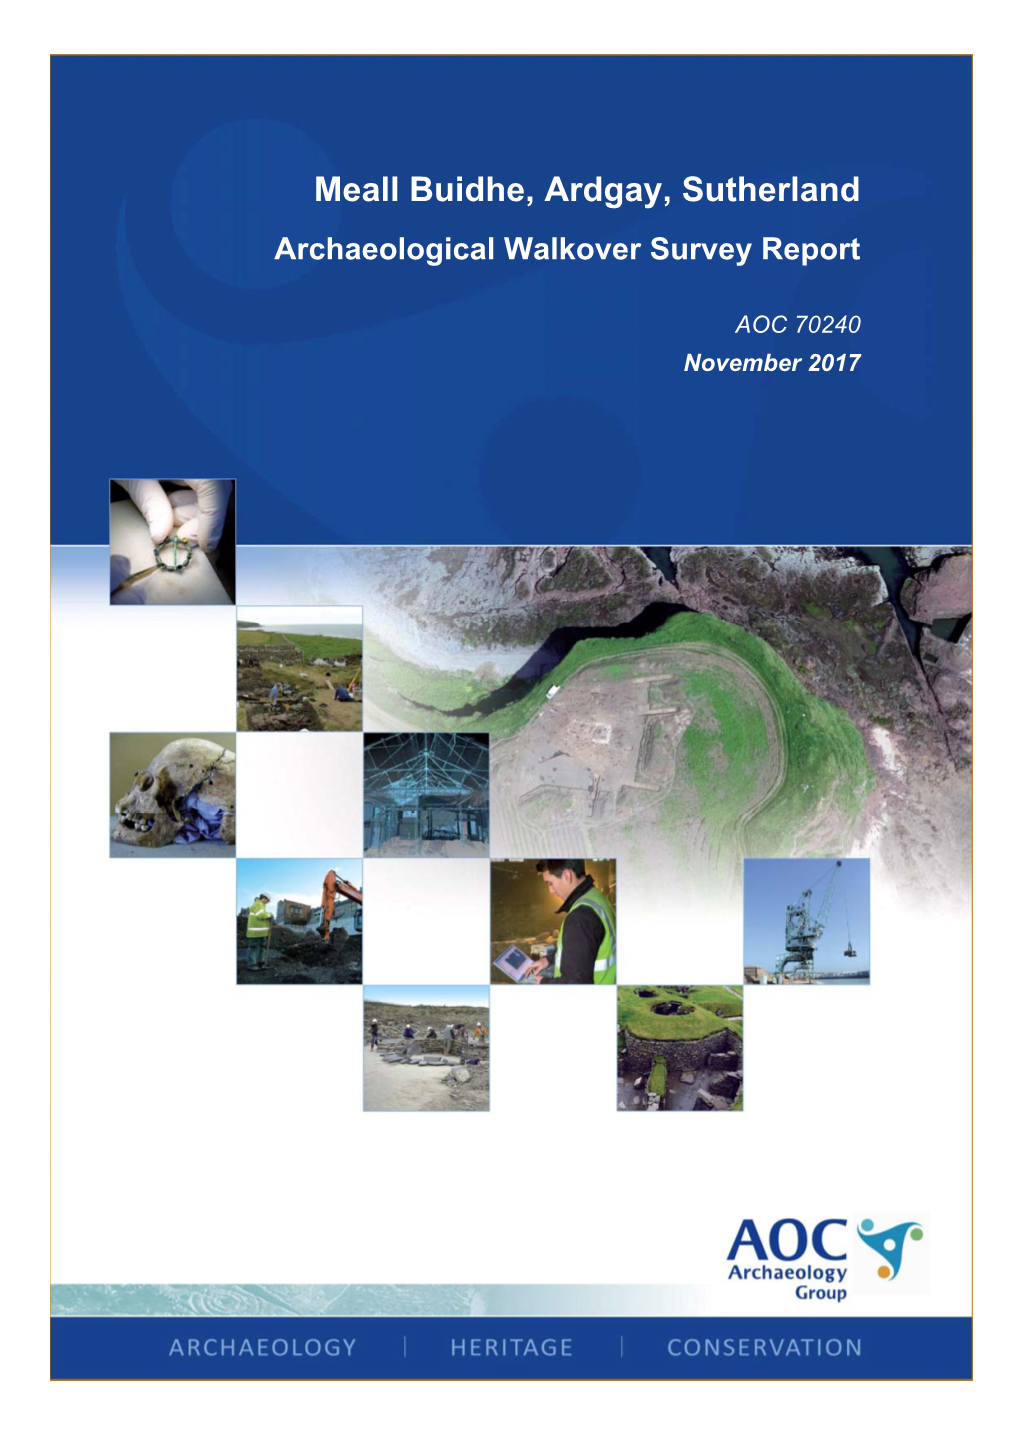 Meall Buidhe, Ardgay, Sutherland Archaeological Walkover Survey Report